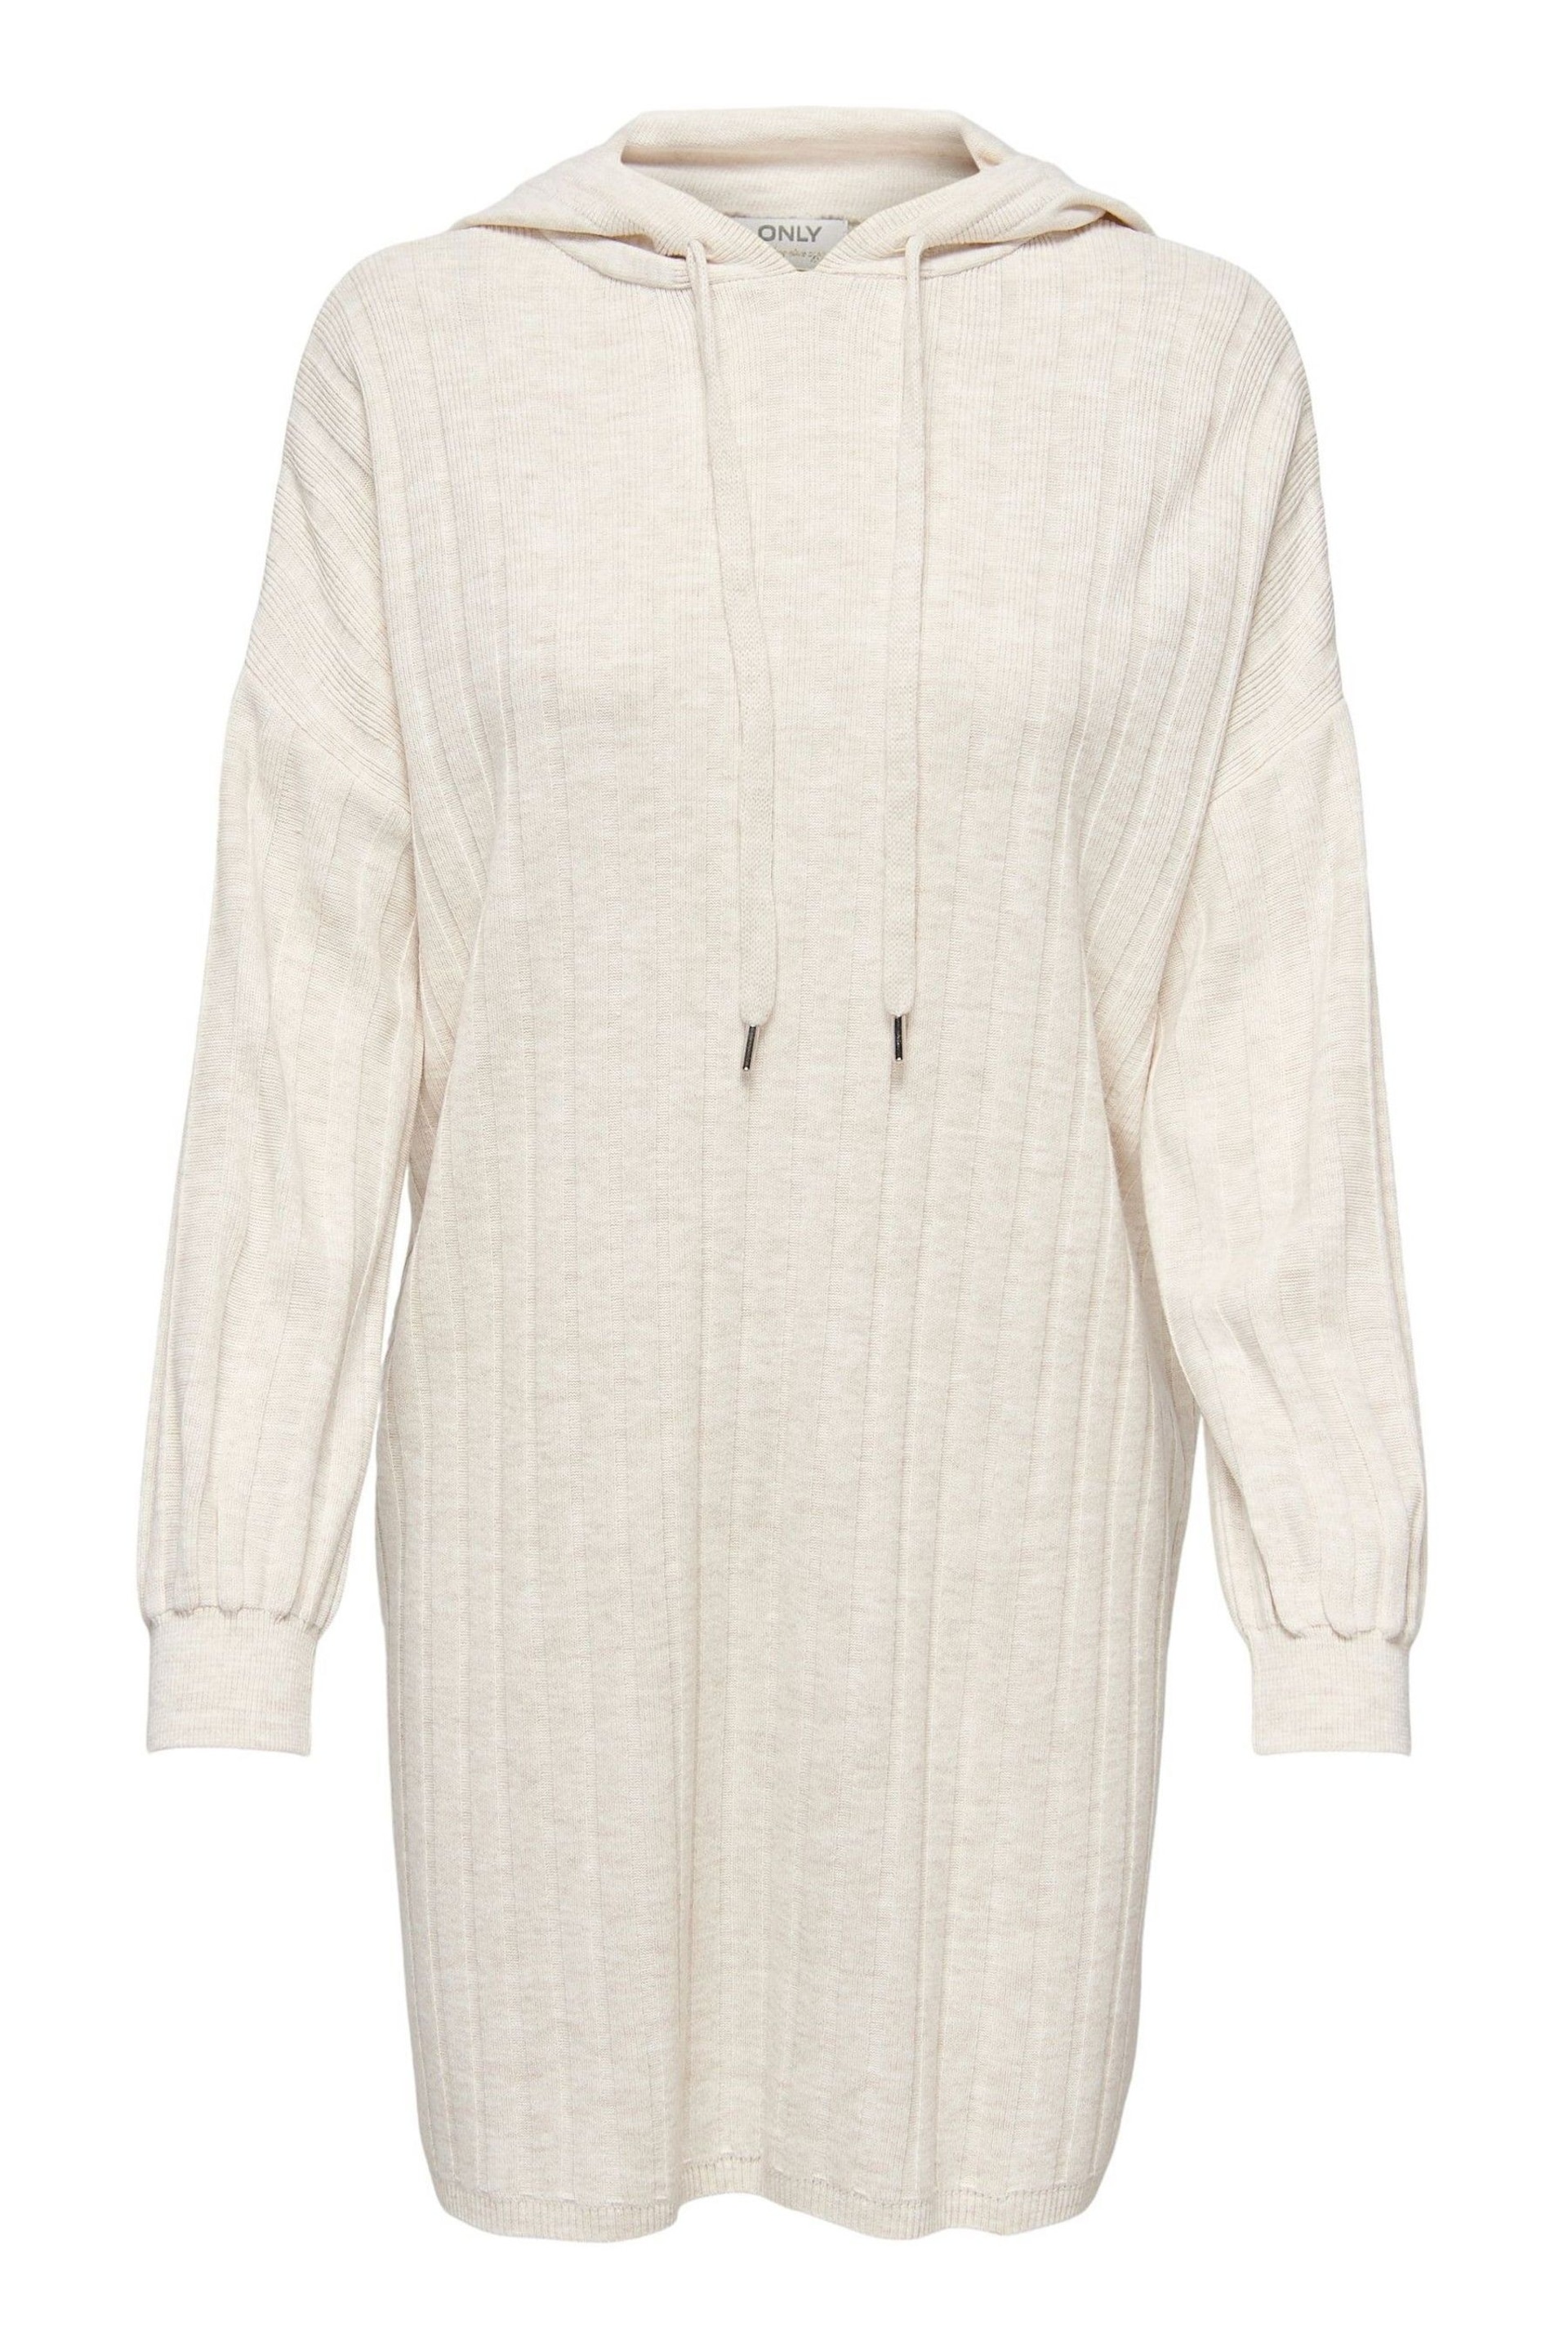 ONLY Cream Knitted Hooded Cosy Lounge Jumper Dress - Image 6 of 6